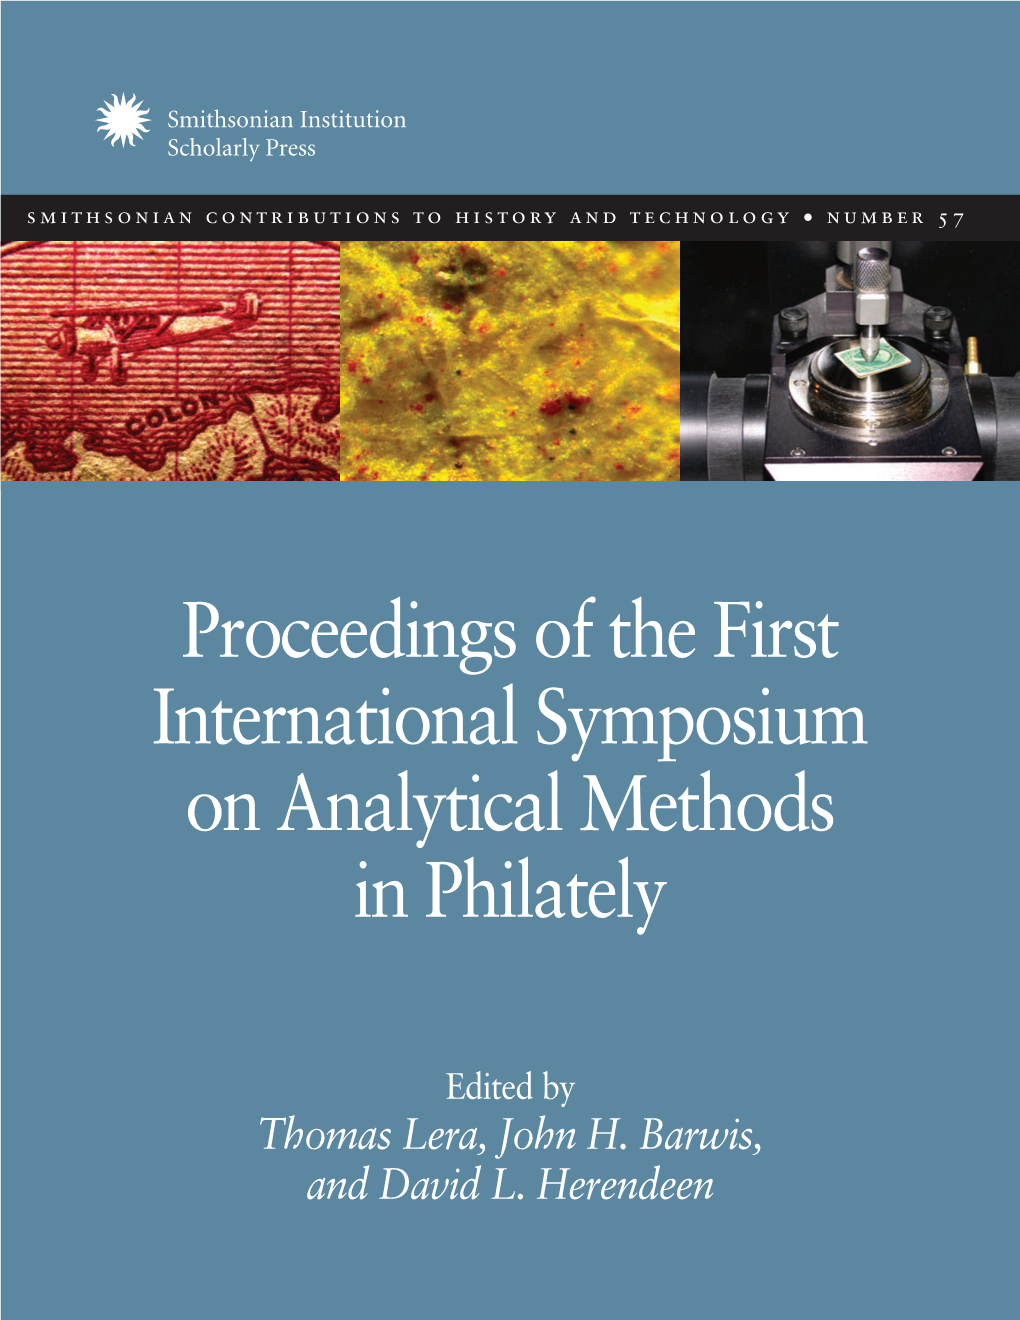 Proceedings of the First International Symposium on Analytical Methods in Philately